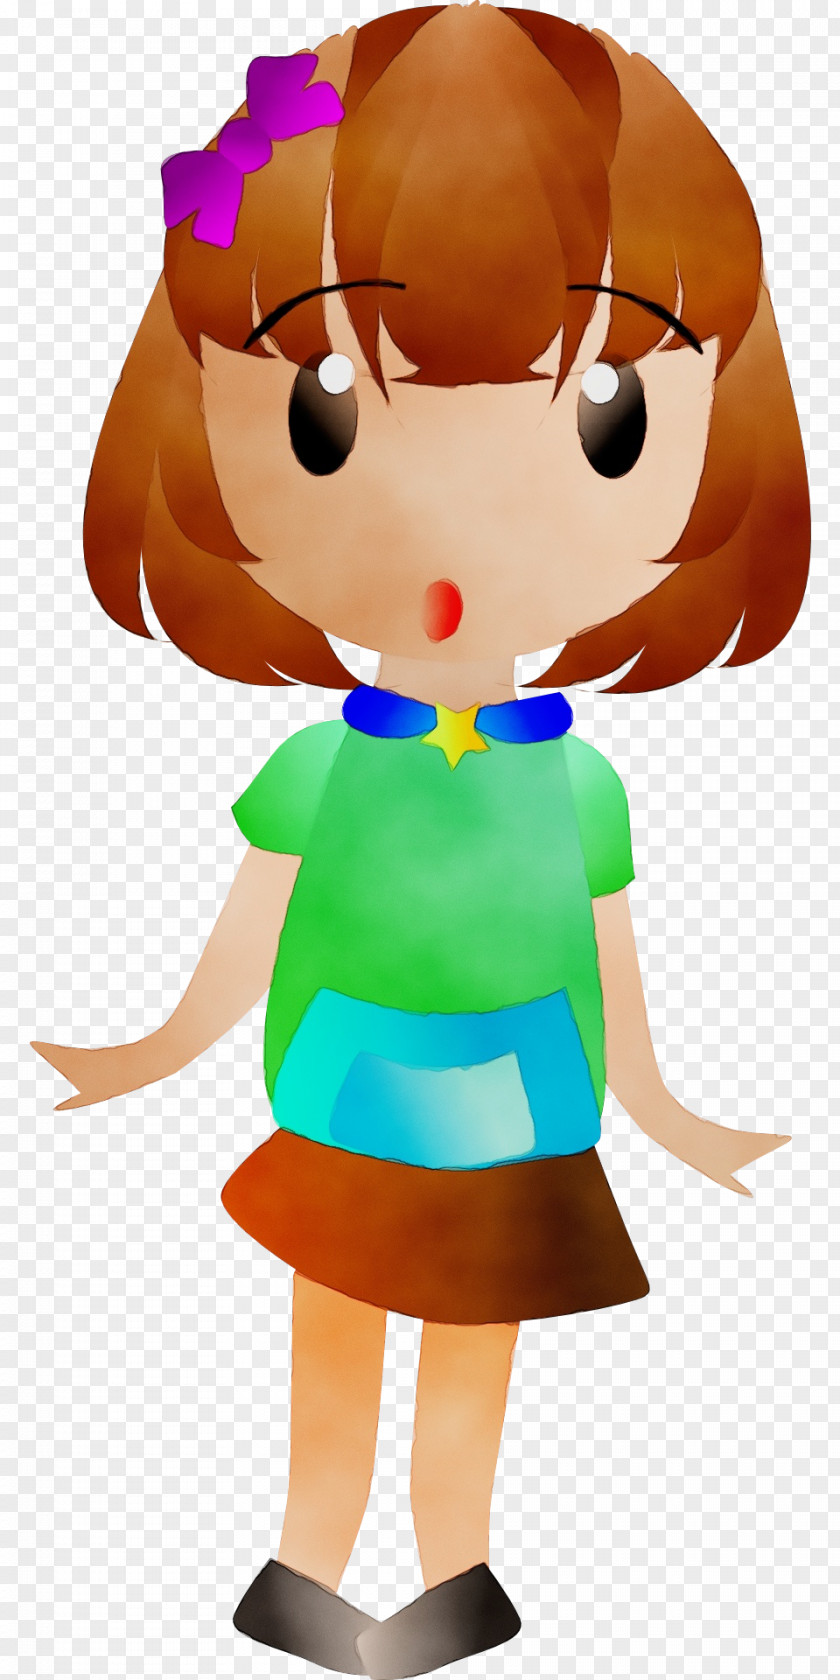 Style Stuffed Toy Girl Cartoon PNG